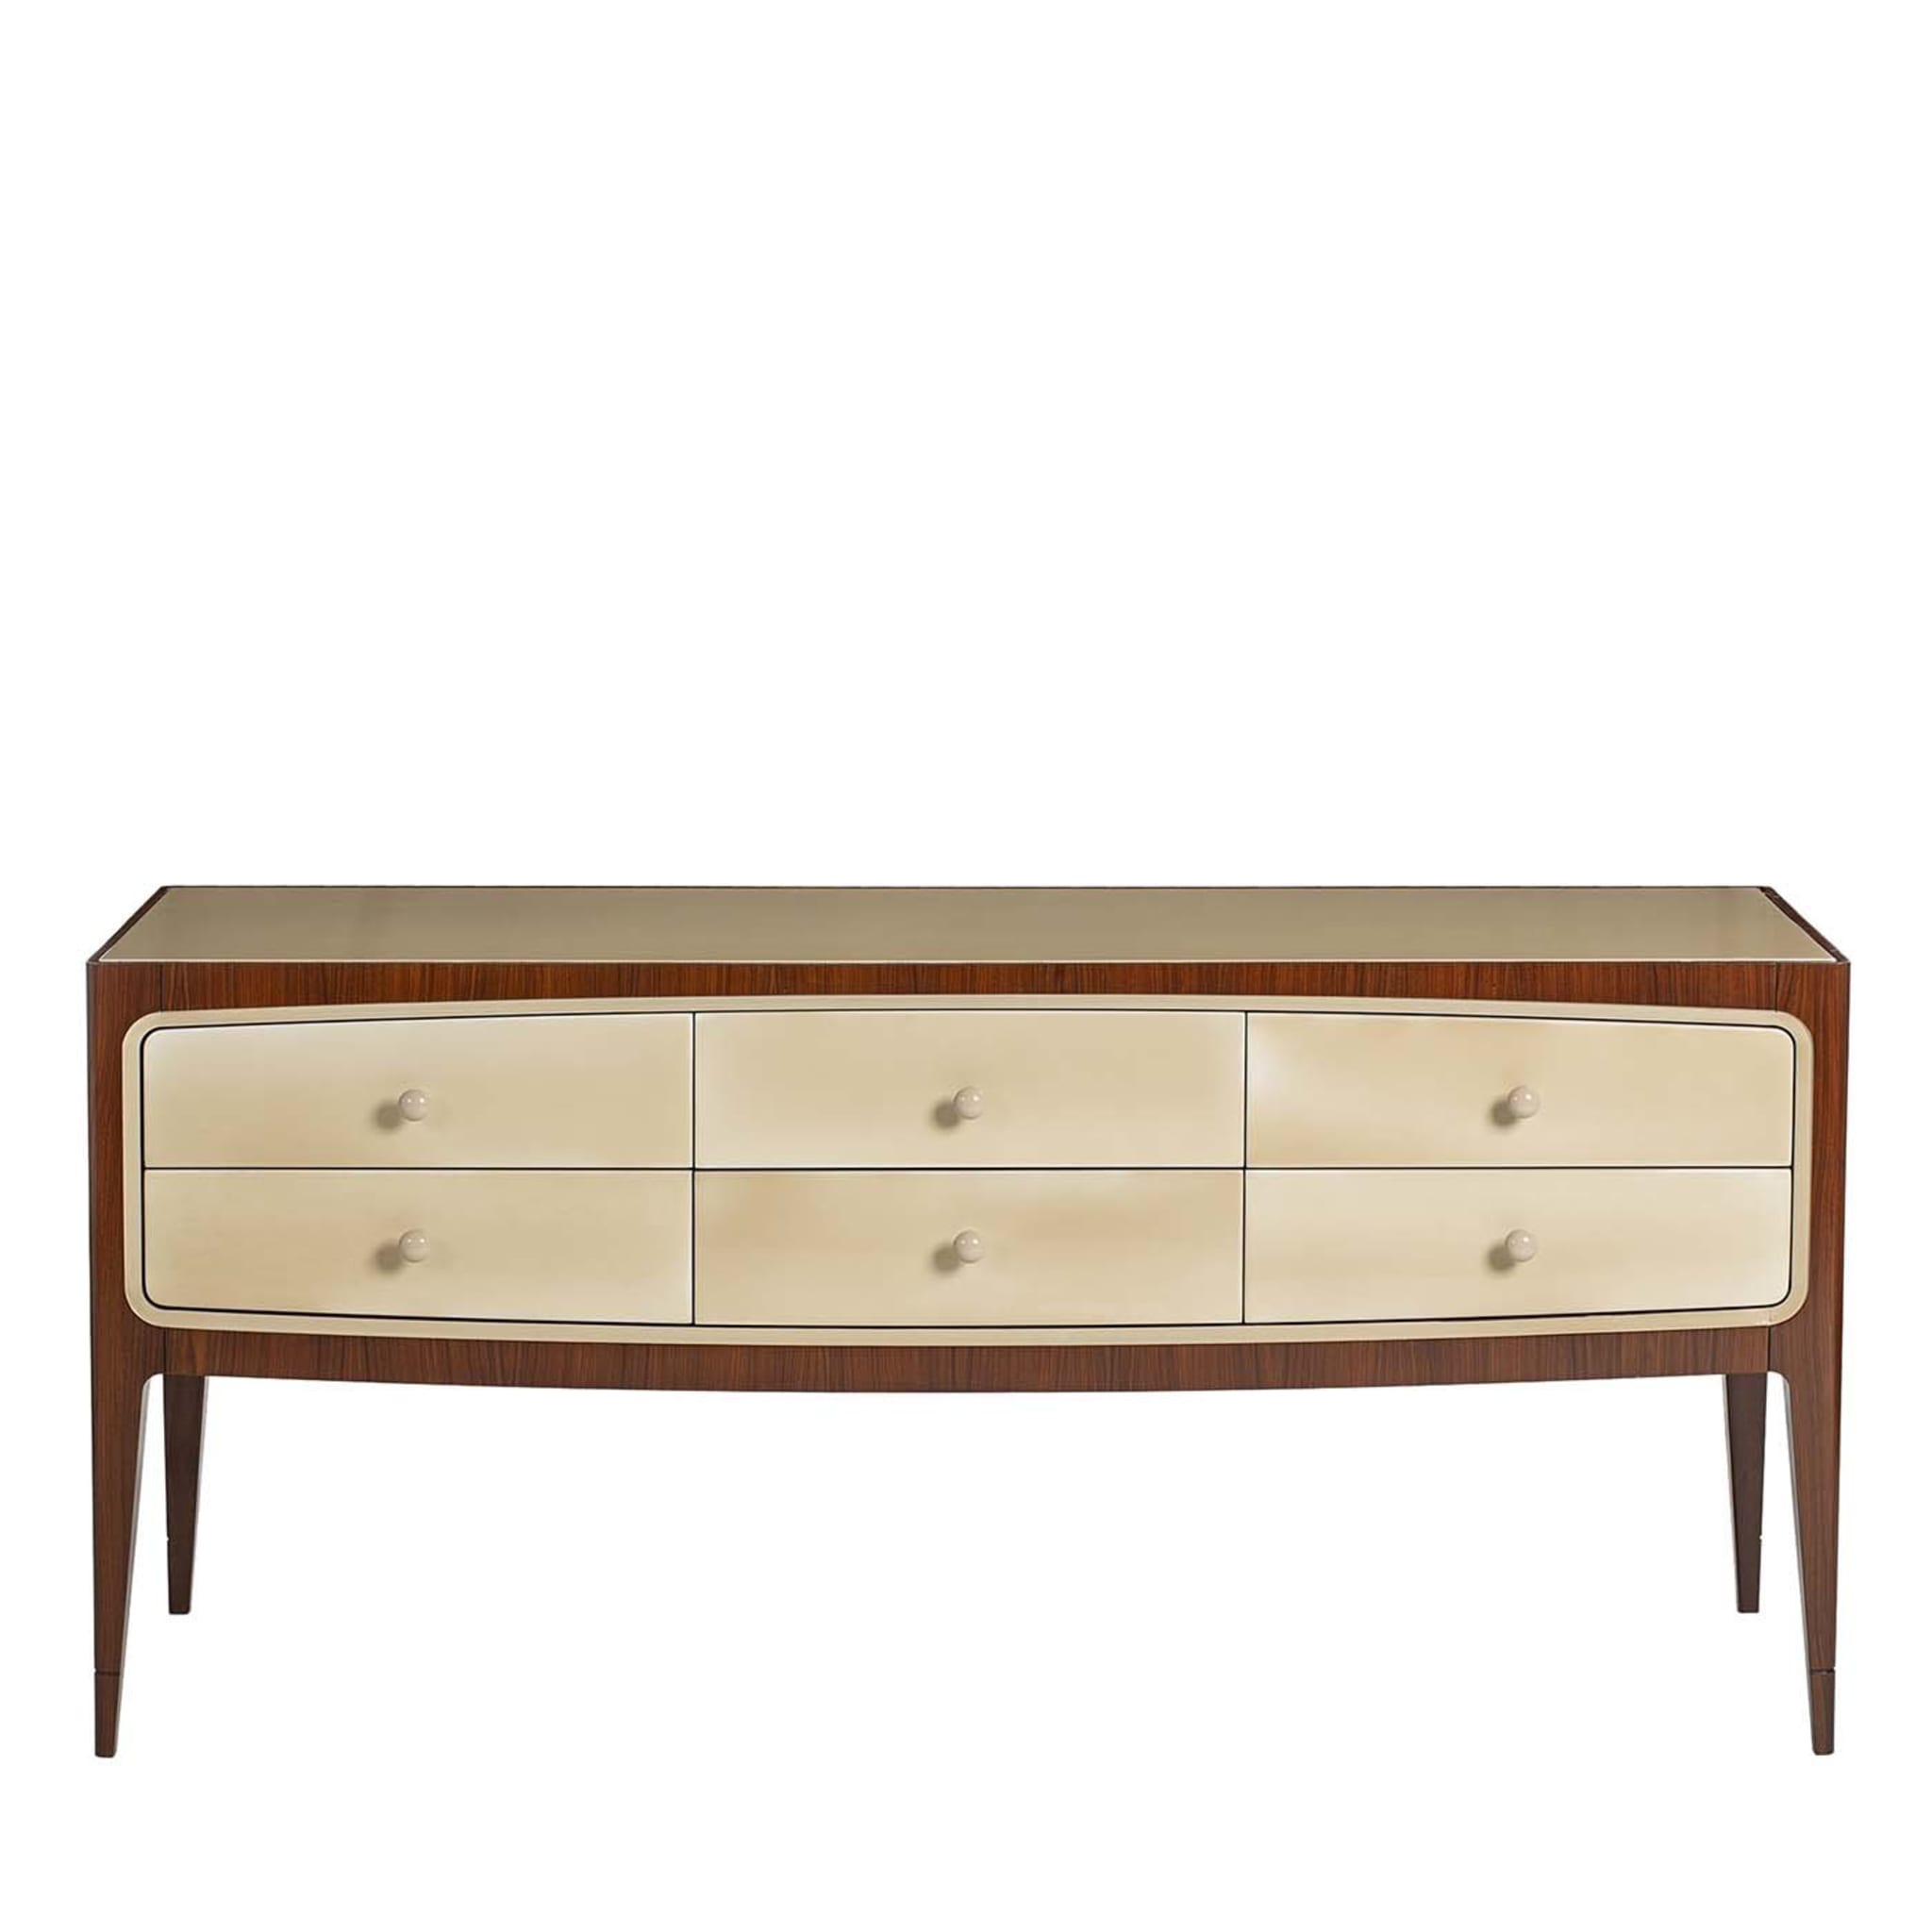 60s Style Beechwood Sideboard with Drawers 8712 - Main view